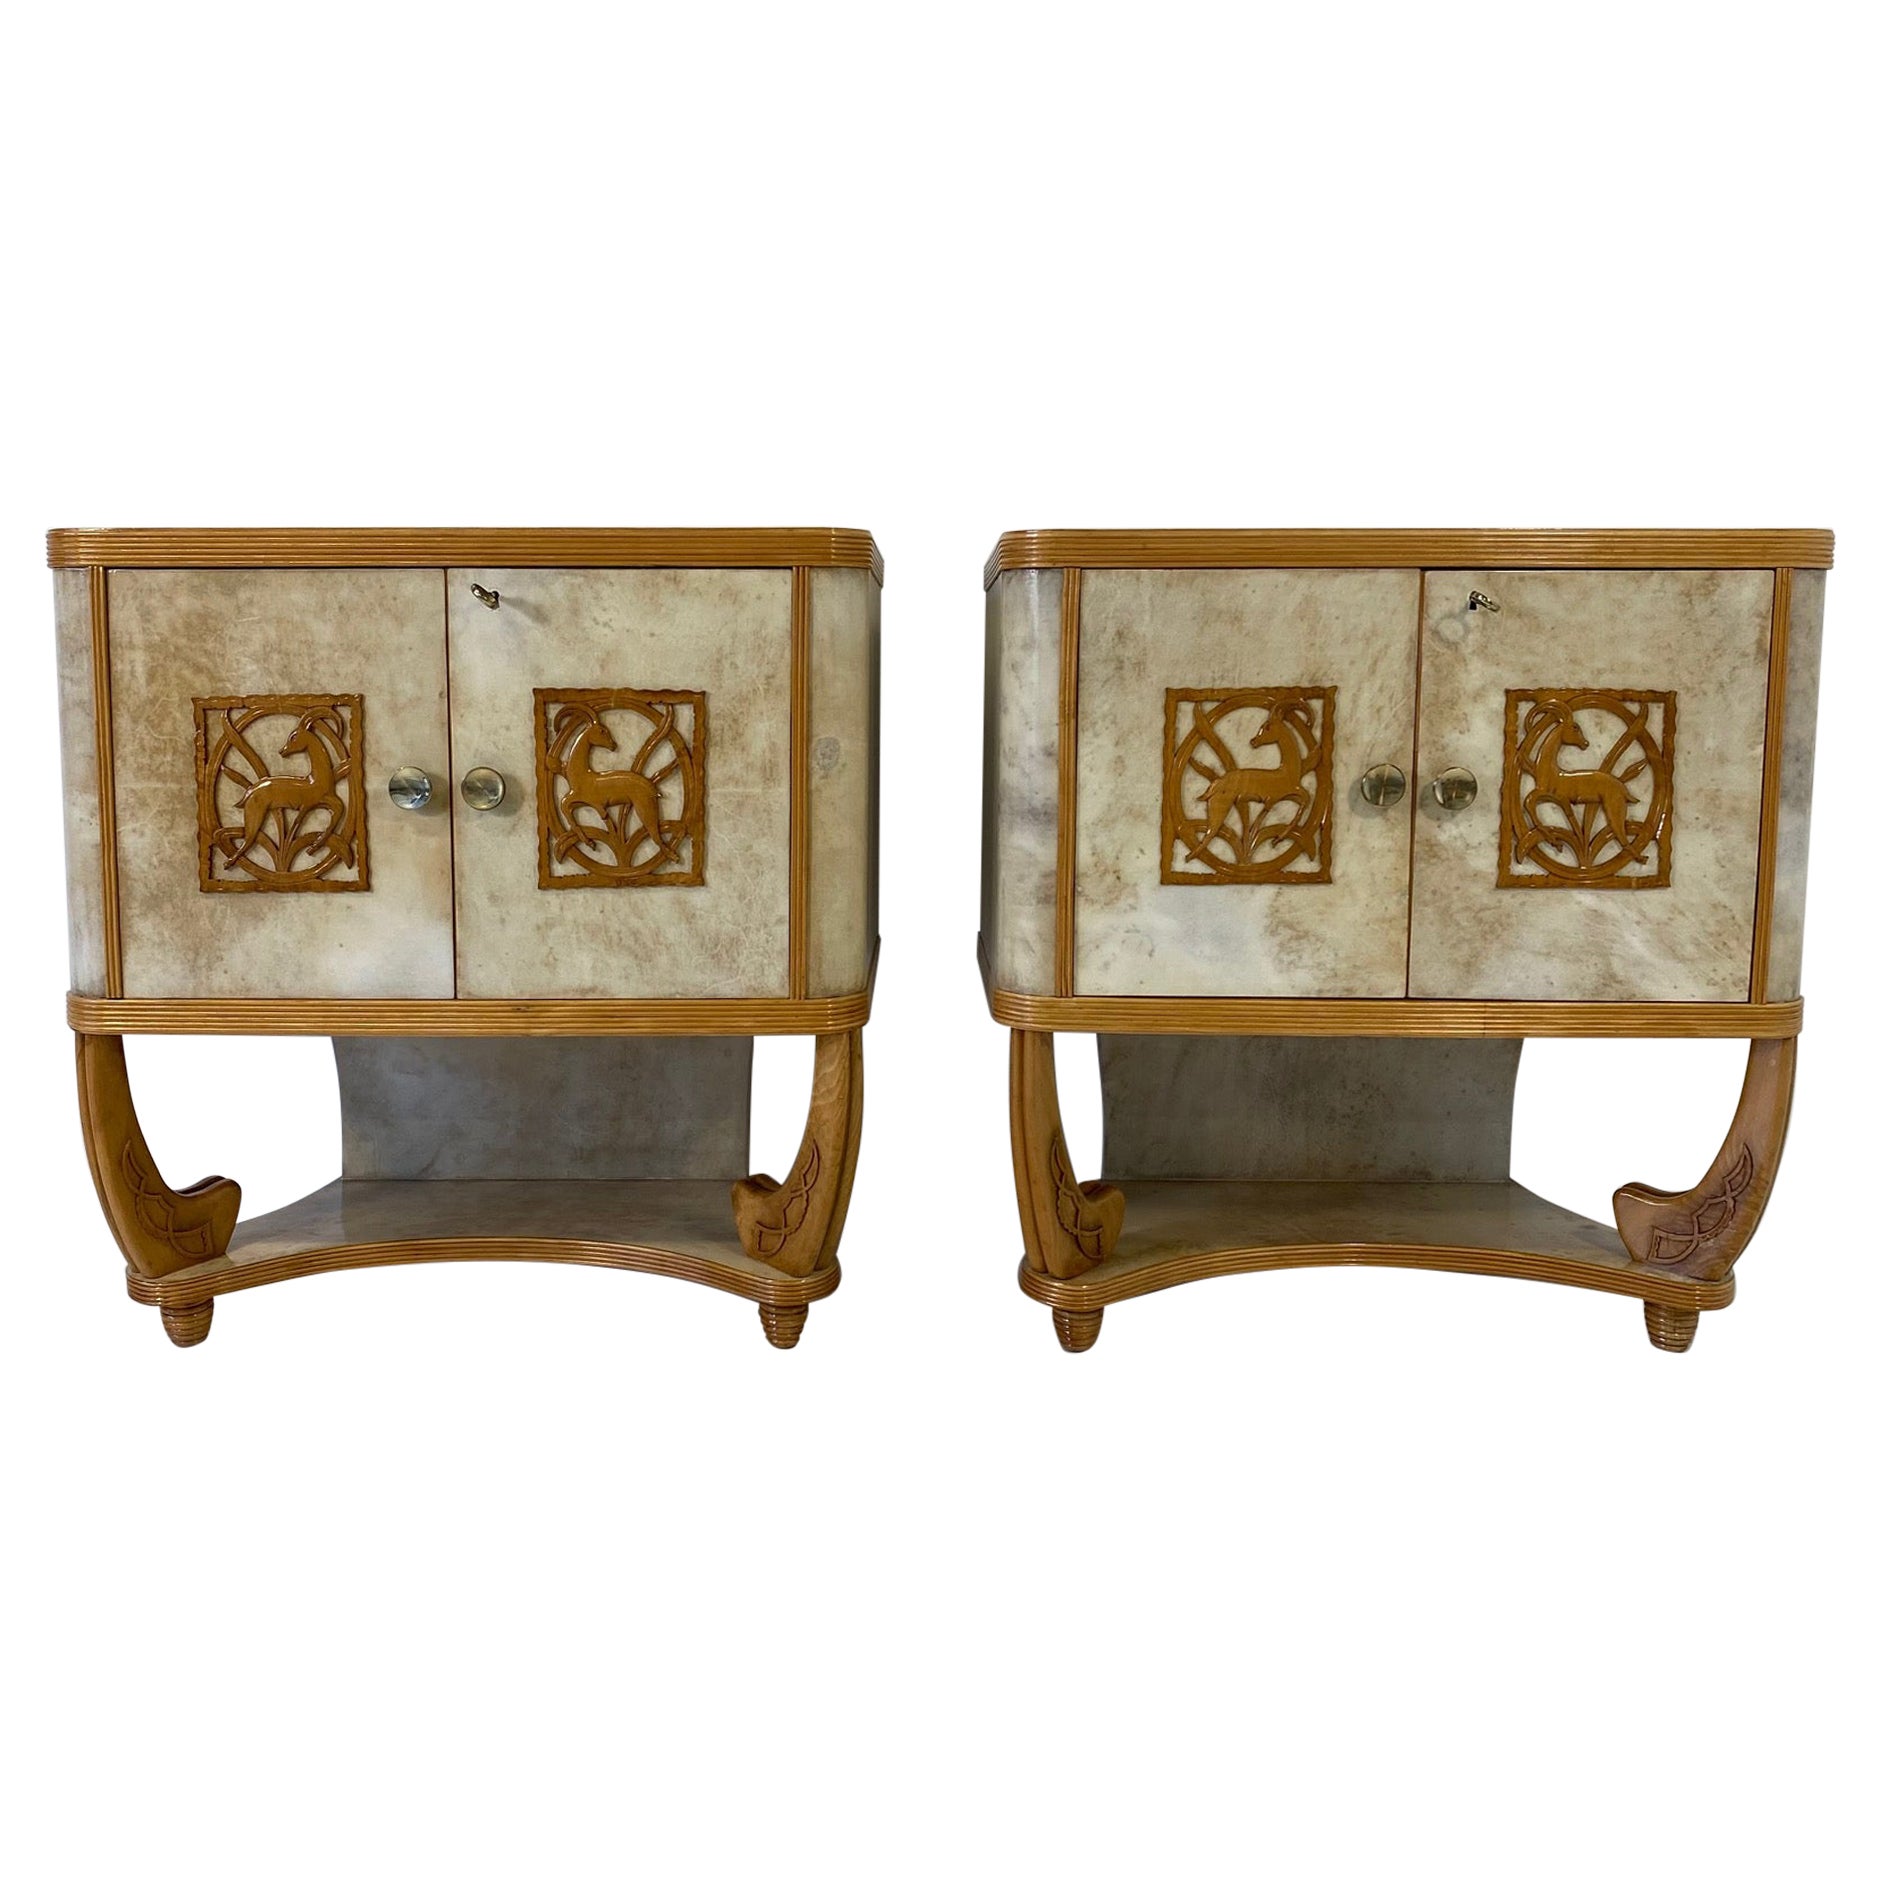 Pair of Italian Art Deco Parchment and Maple Twin Cabinets, 1930s Attr. to Colli